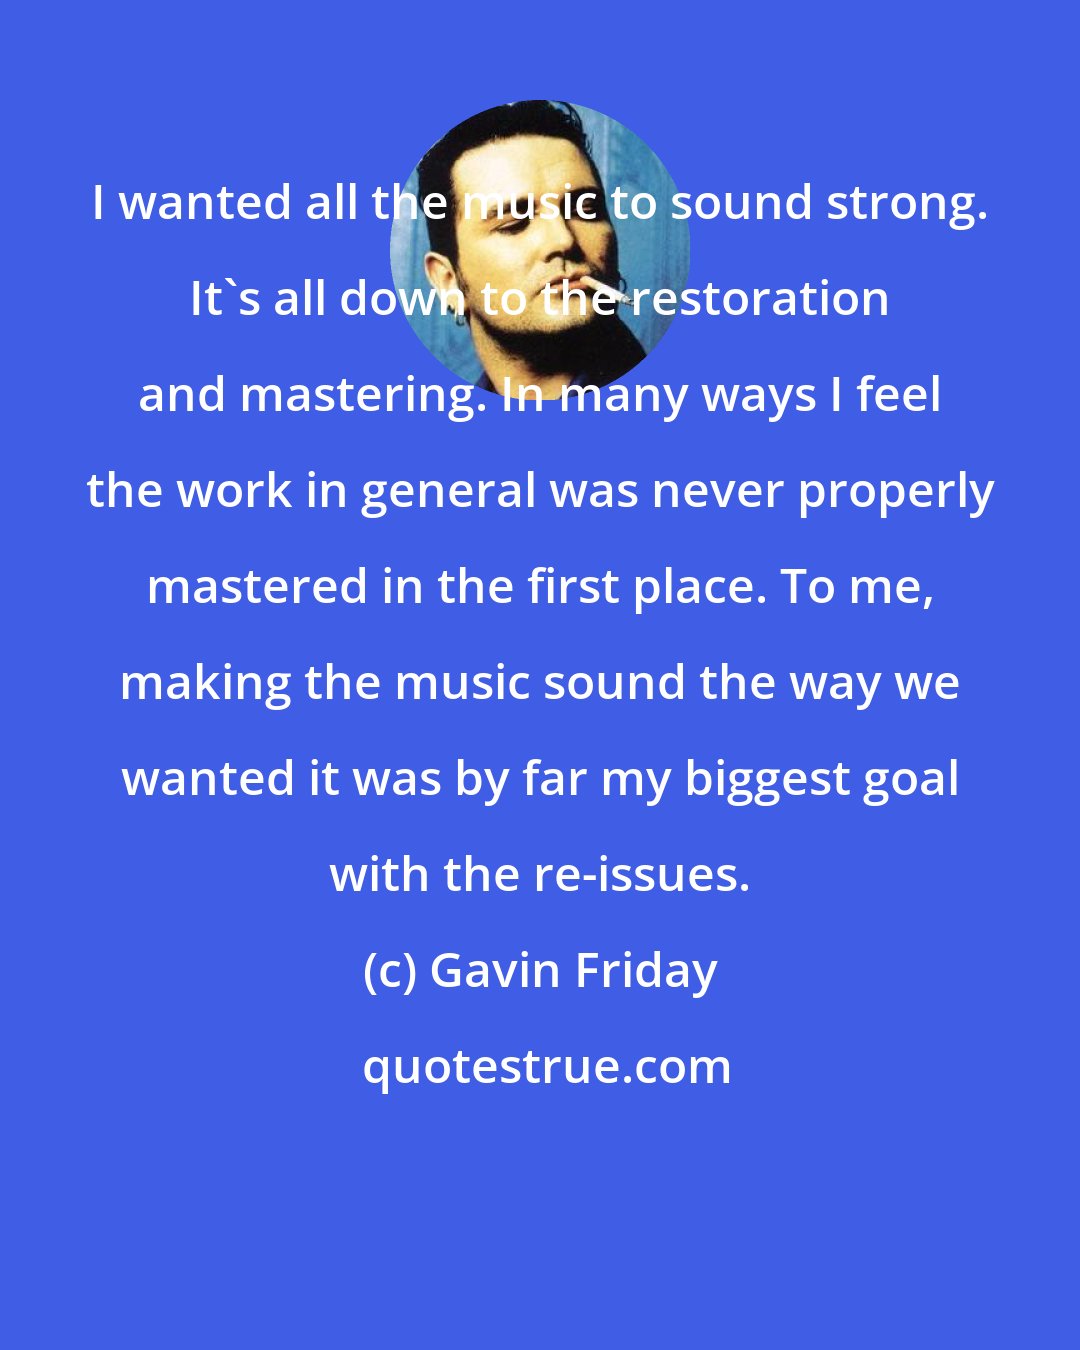 Gavin Friday: I wanted all the music to sound strong. It's all down to the restoration and mastering. In many ways I feel the work in general was never properly mastered in the first place. To me, making the music sound the way we wanted it was by far my biggest goal with the re-issues.